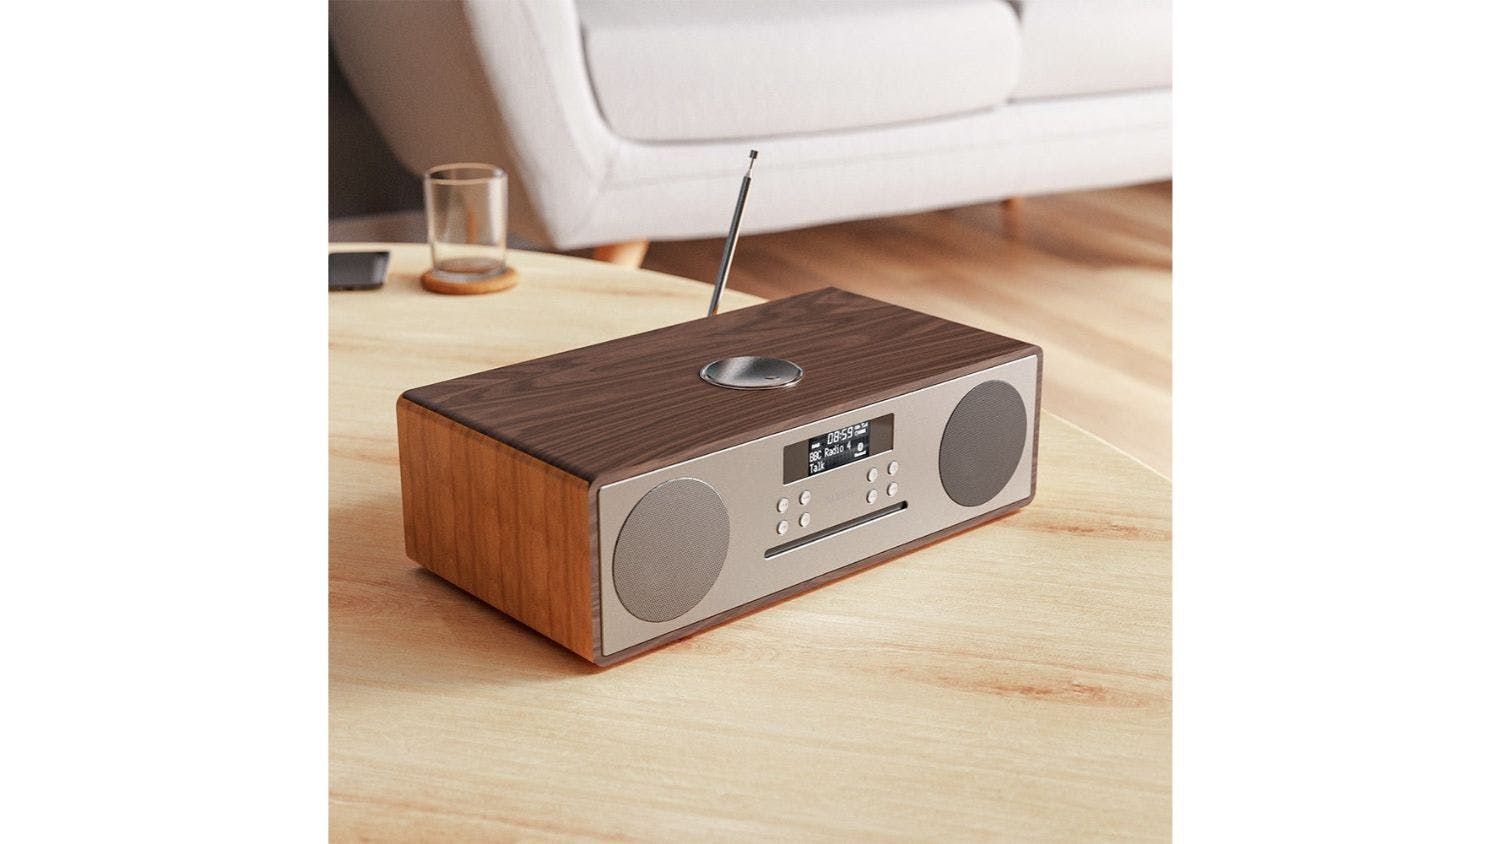 Majority Oakington review: a DAB radio, CD player and Bluetooth speaker  audio package